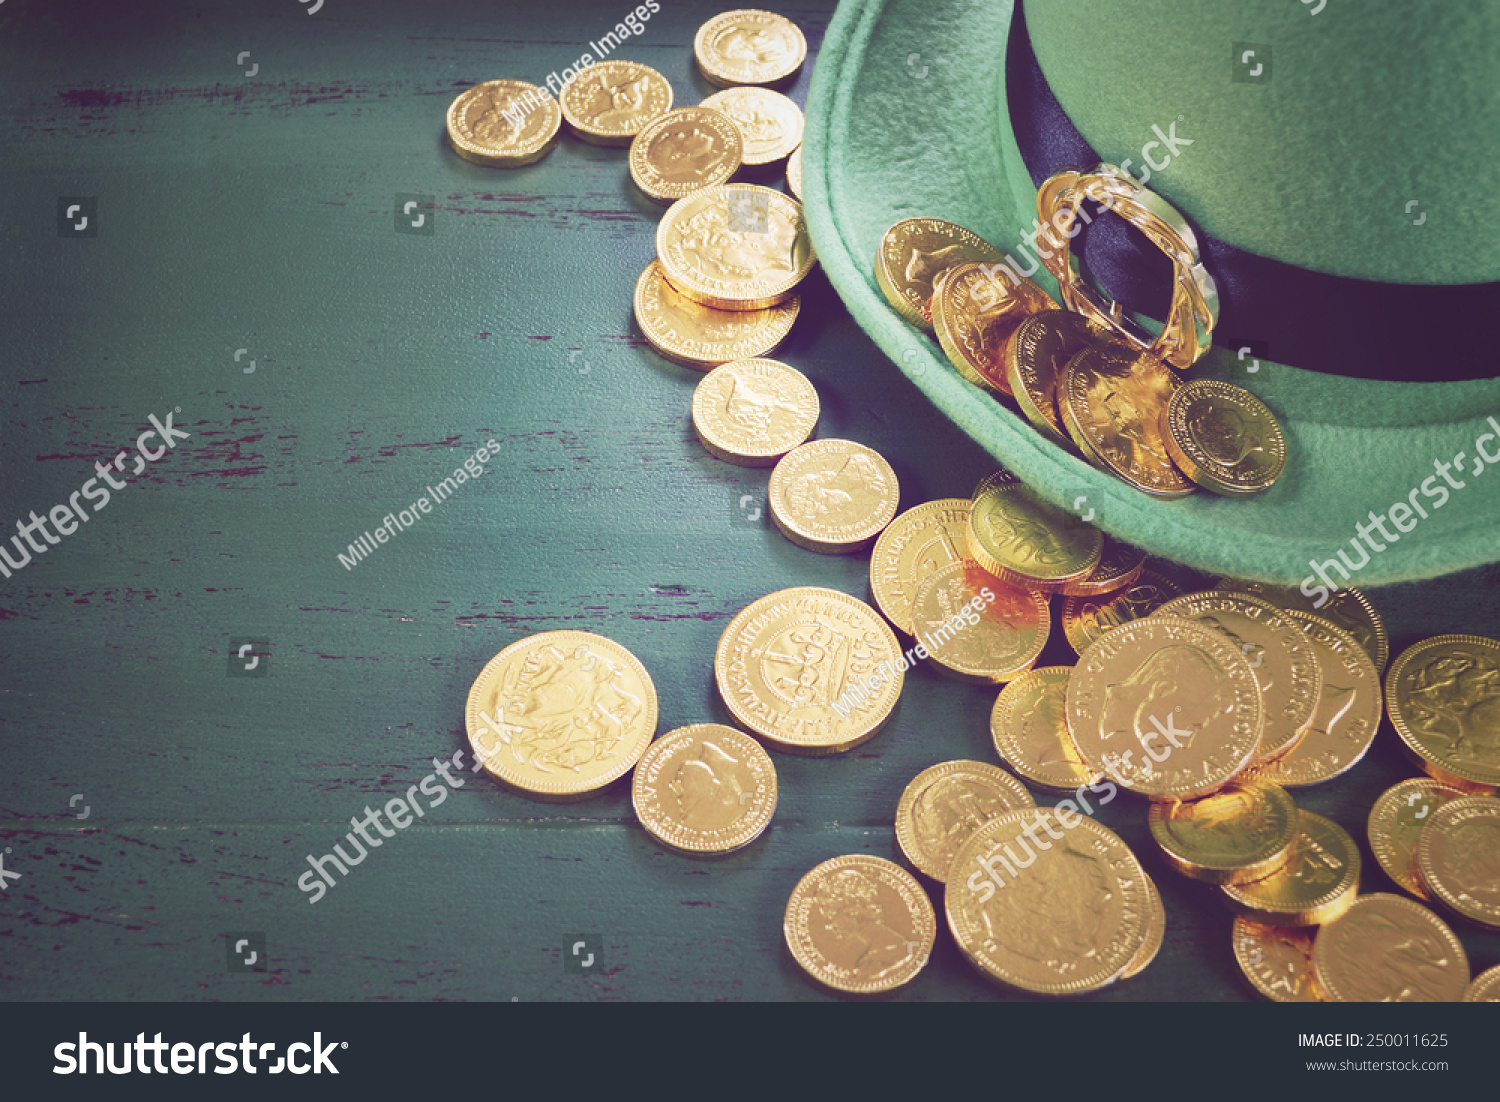 Happy St Patricks Day leprechaun hat with gold chocolate coins on vintage style green wood background, with retro vintage style filters. #250011625